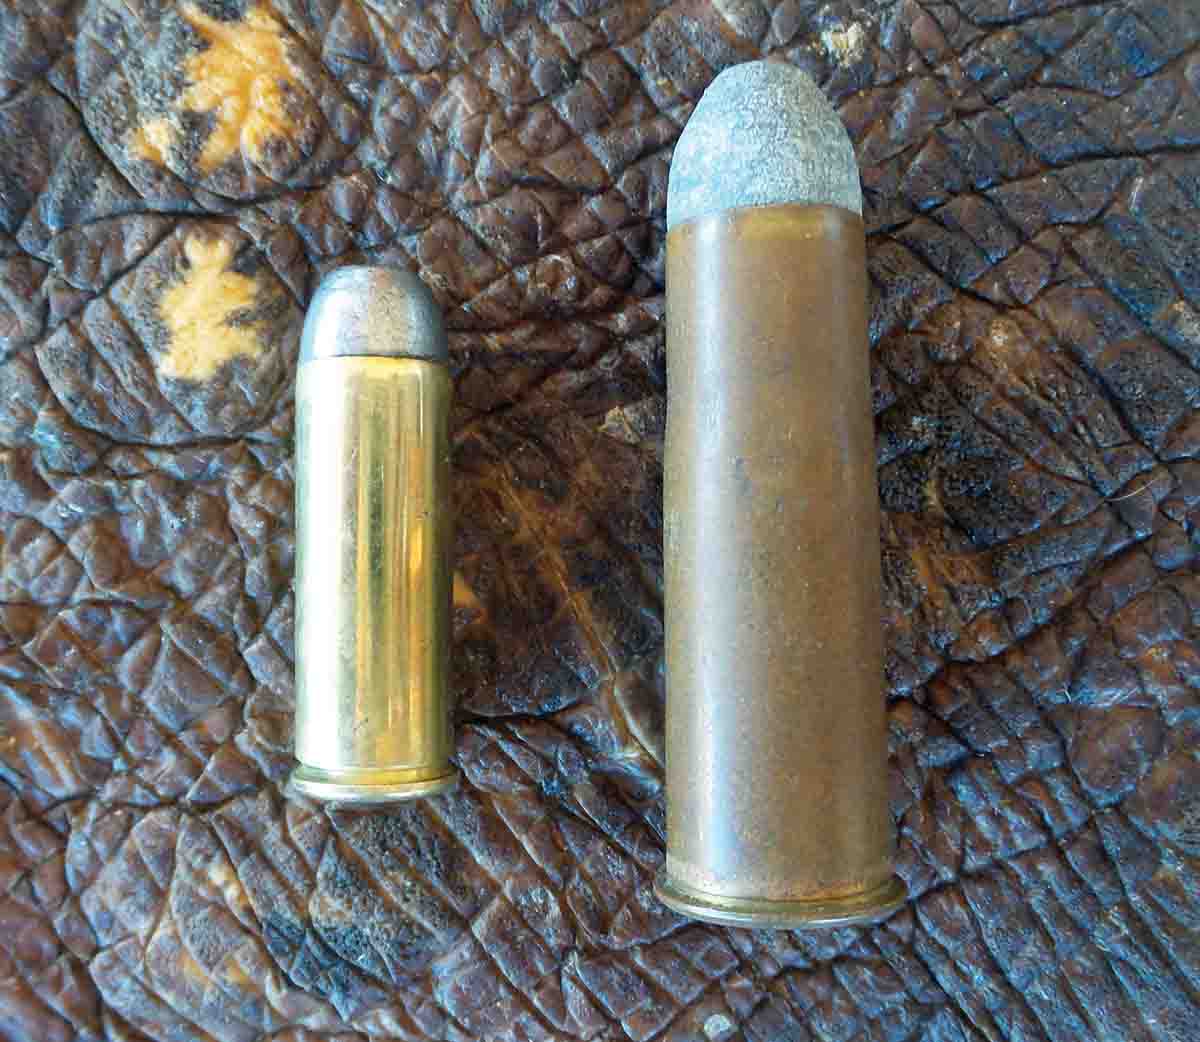 Shown are a (left) .44 Magnum cartridge and a .577 Snider.